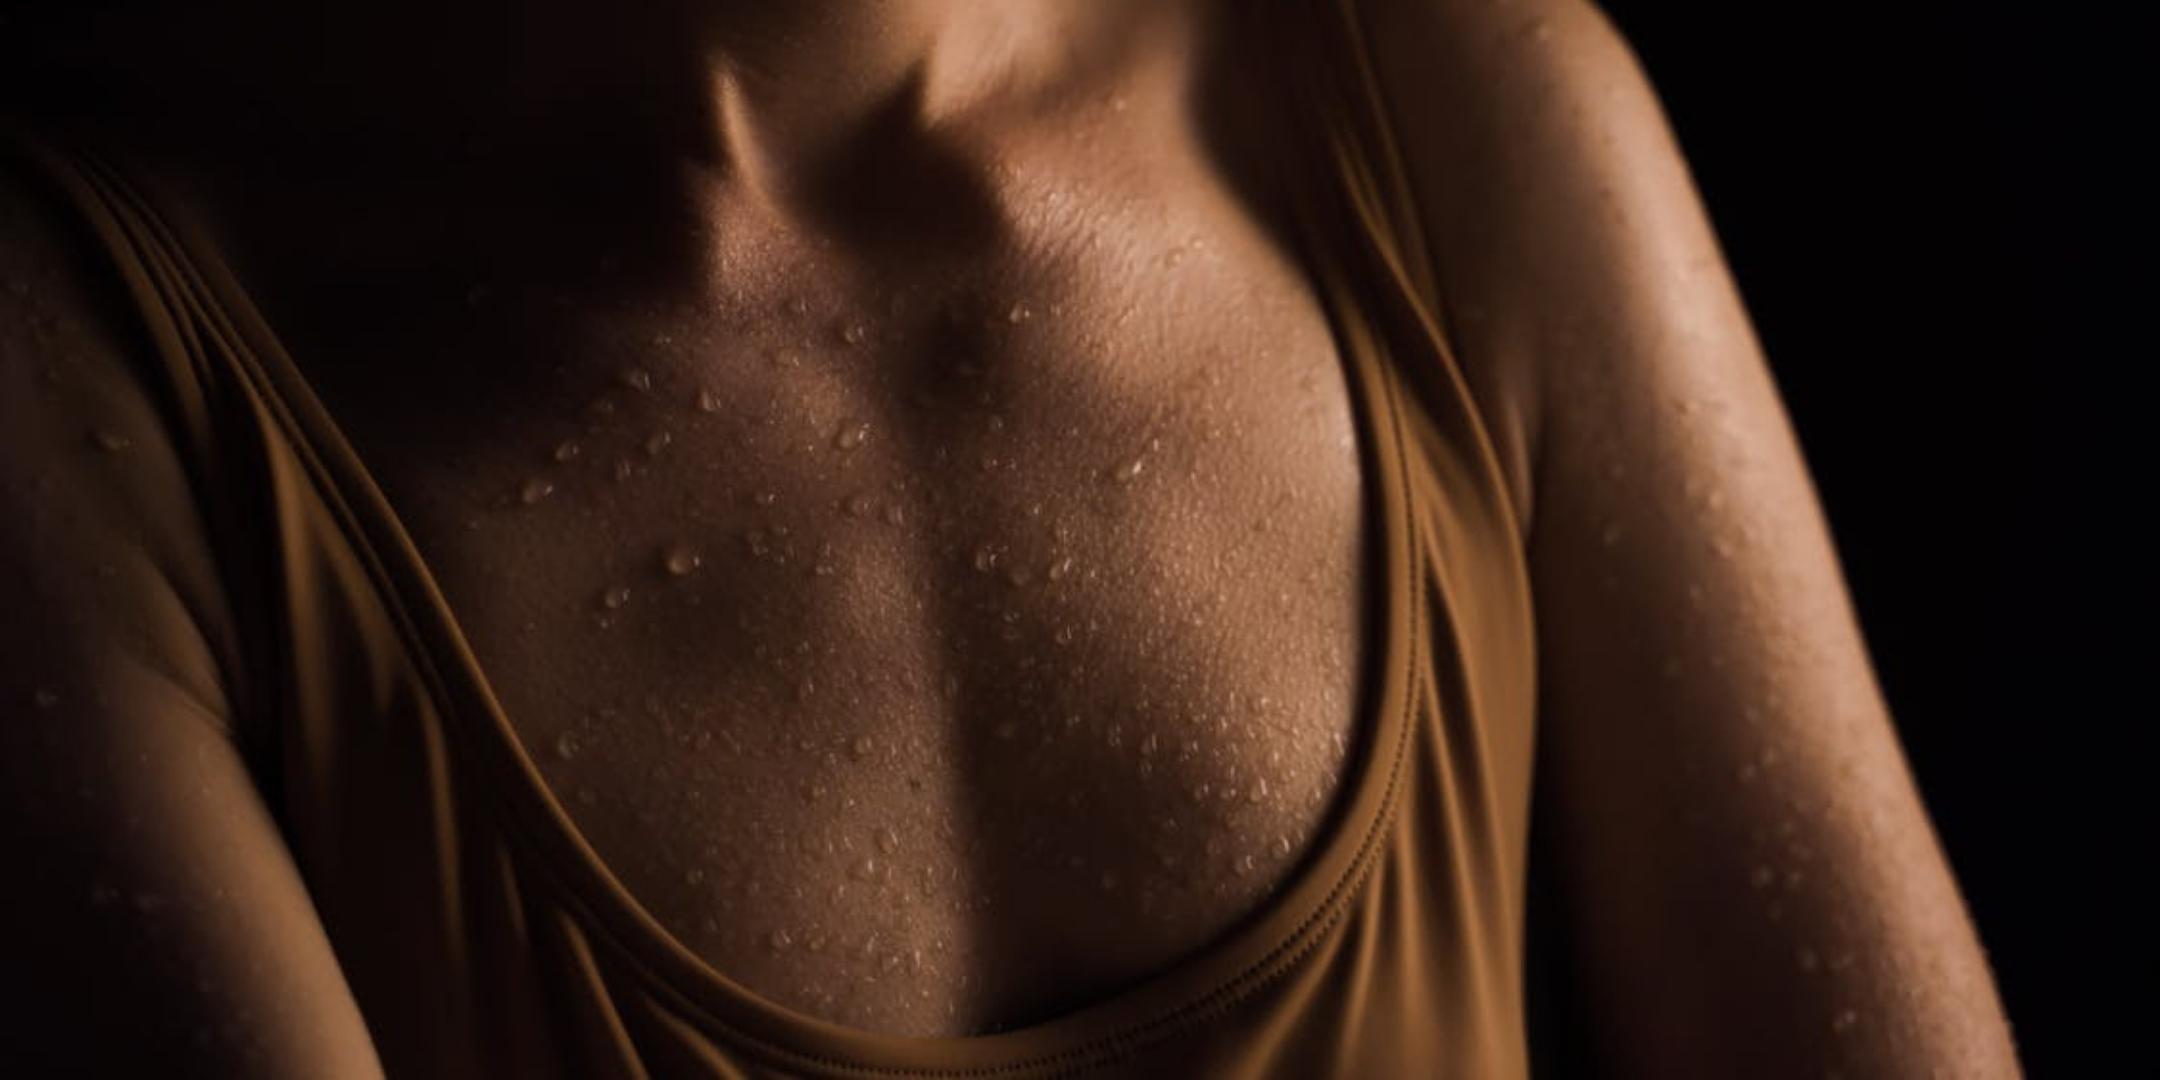 Clogged pores on breast